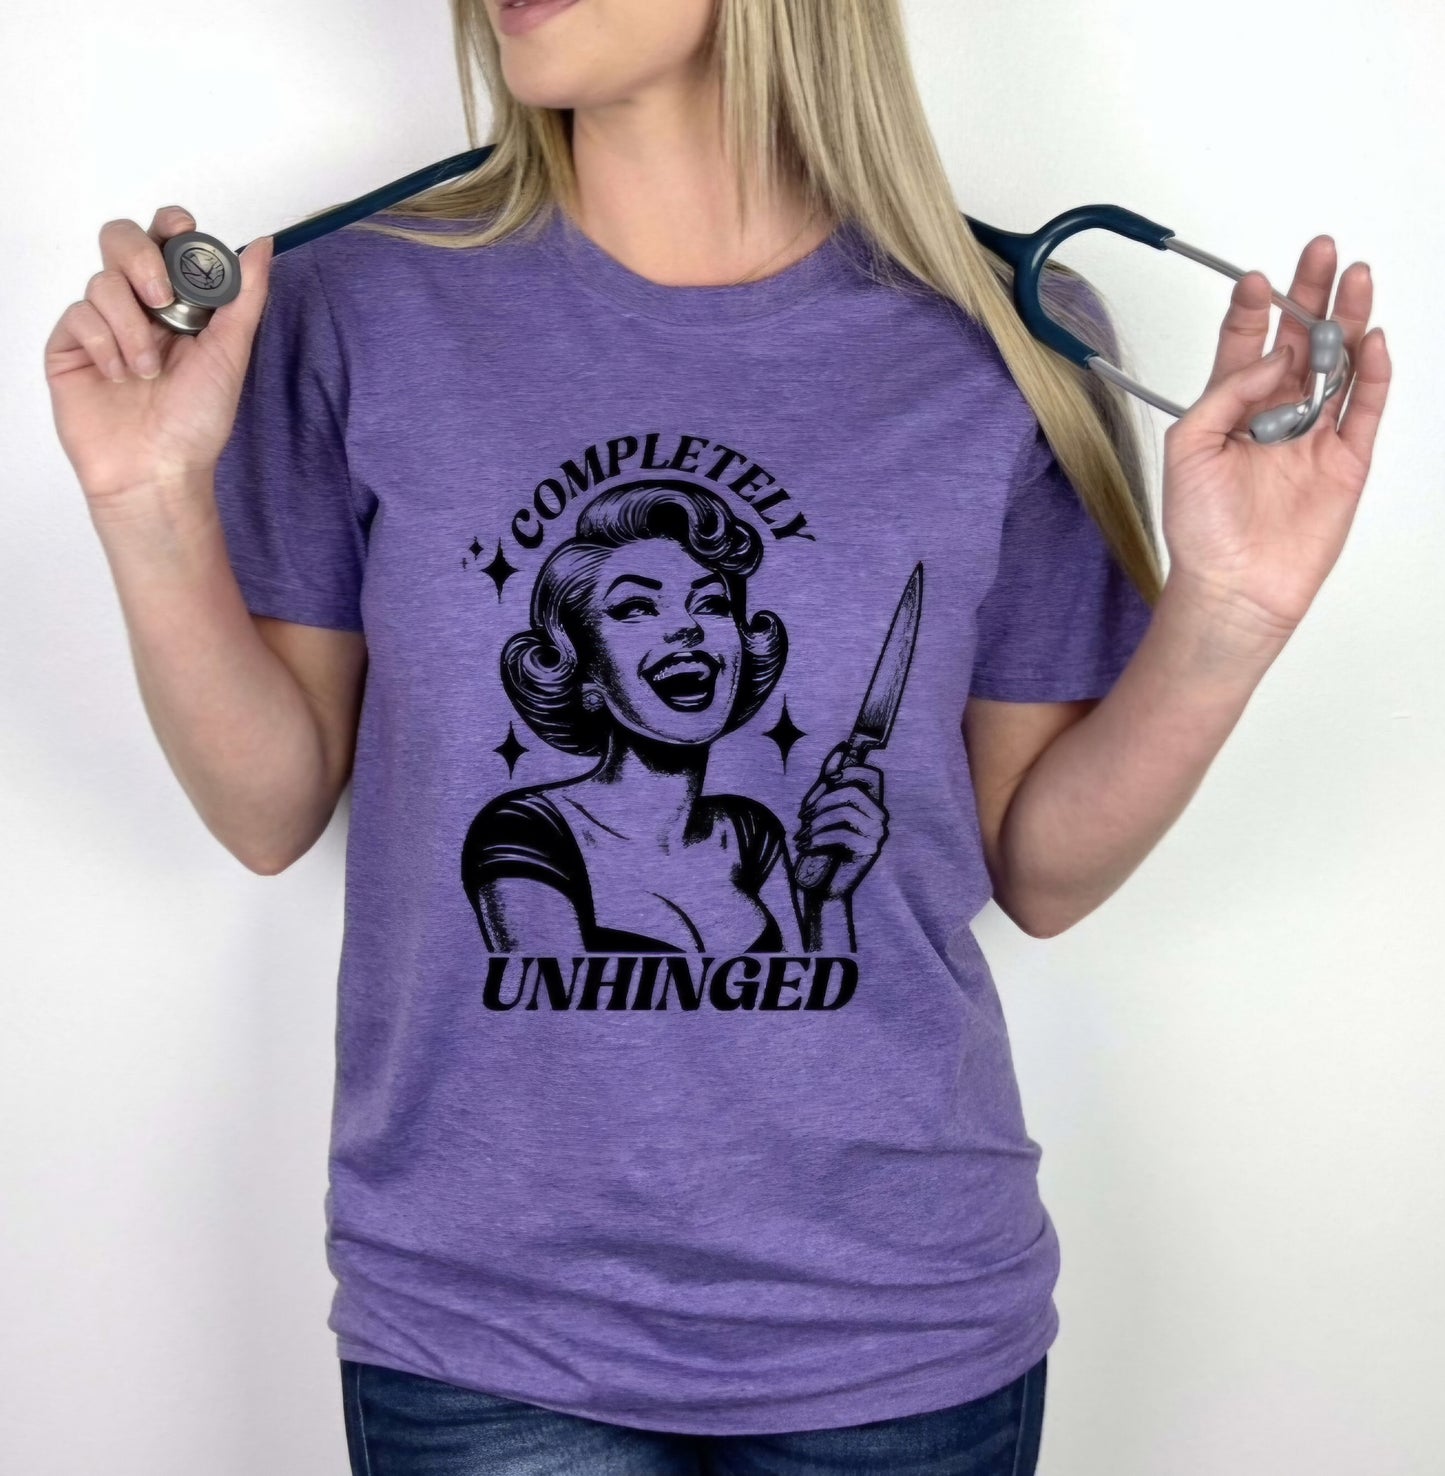 Completely Unhinged Funny Tshirt